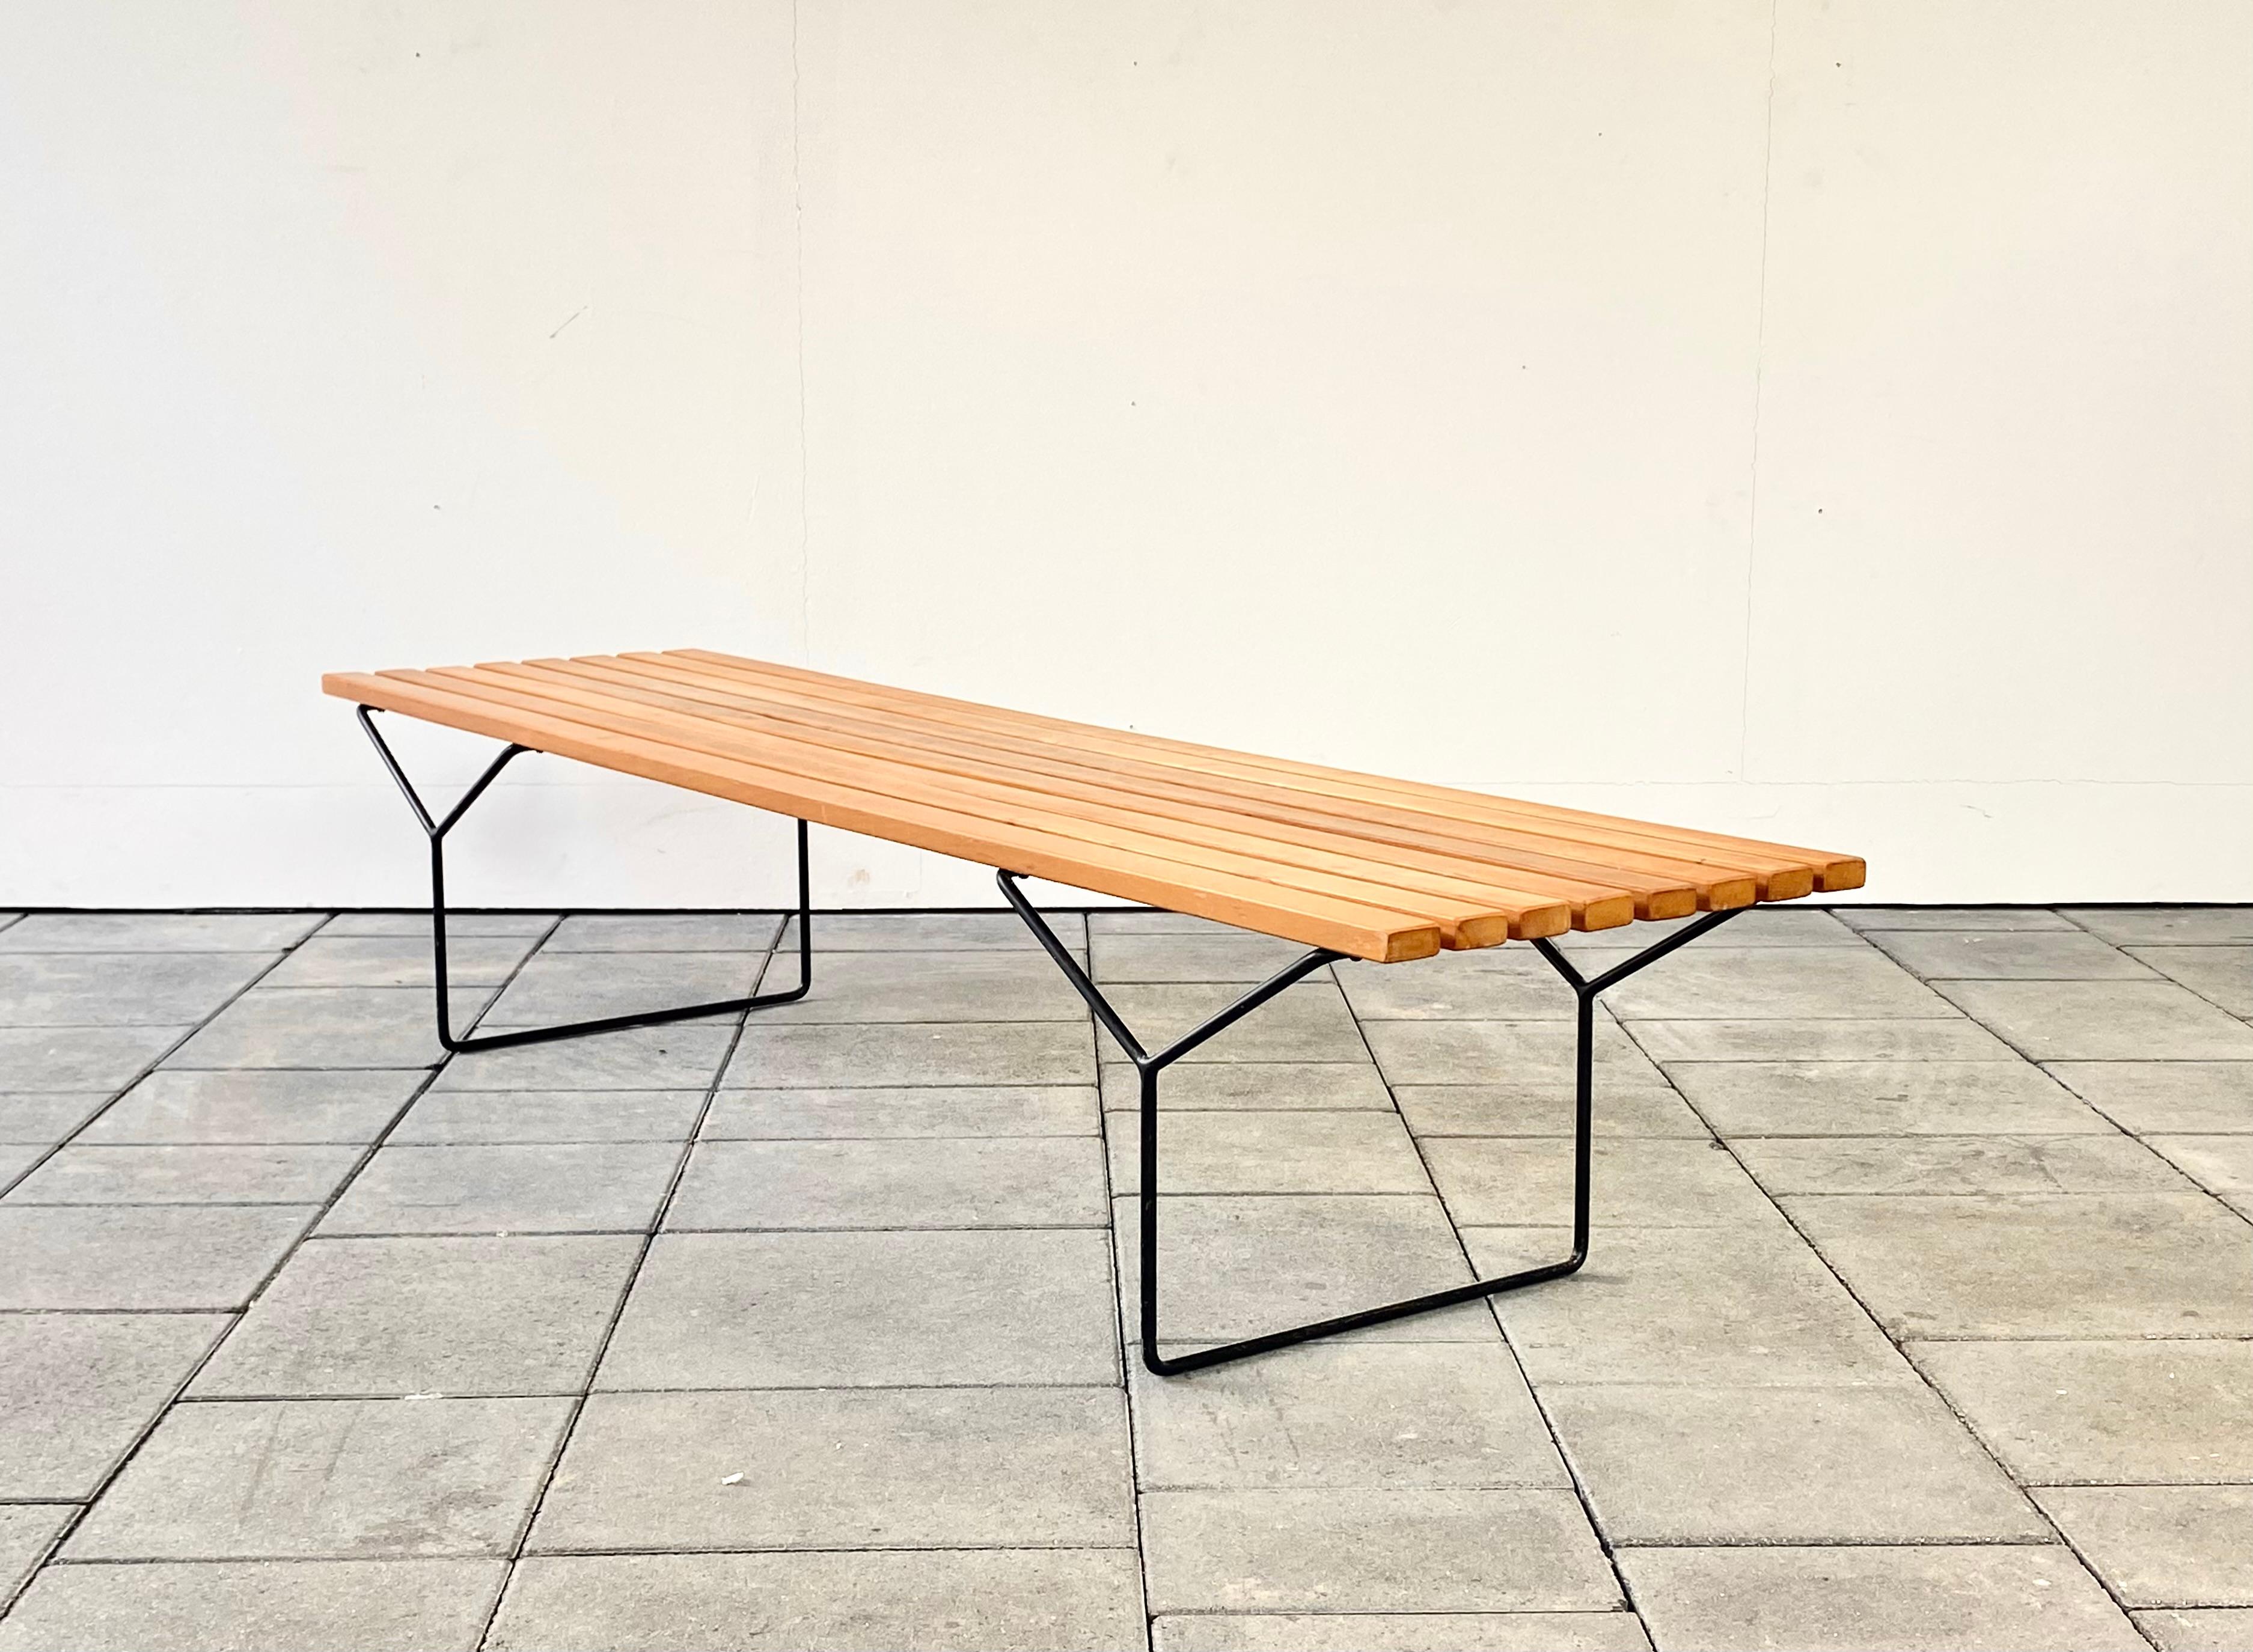 1960ies knoll international 400 slat bench designed by Harry Bertoia, 1952.

The Famous Italian-American sculptor Arieto  Bertoia (born in 1915) moved to the US with his family in 1930. His name in the US was Americanized to „Harry“. 

After